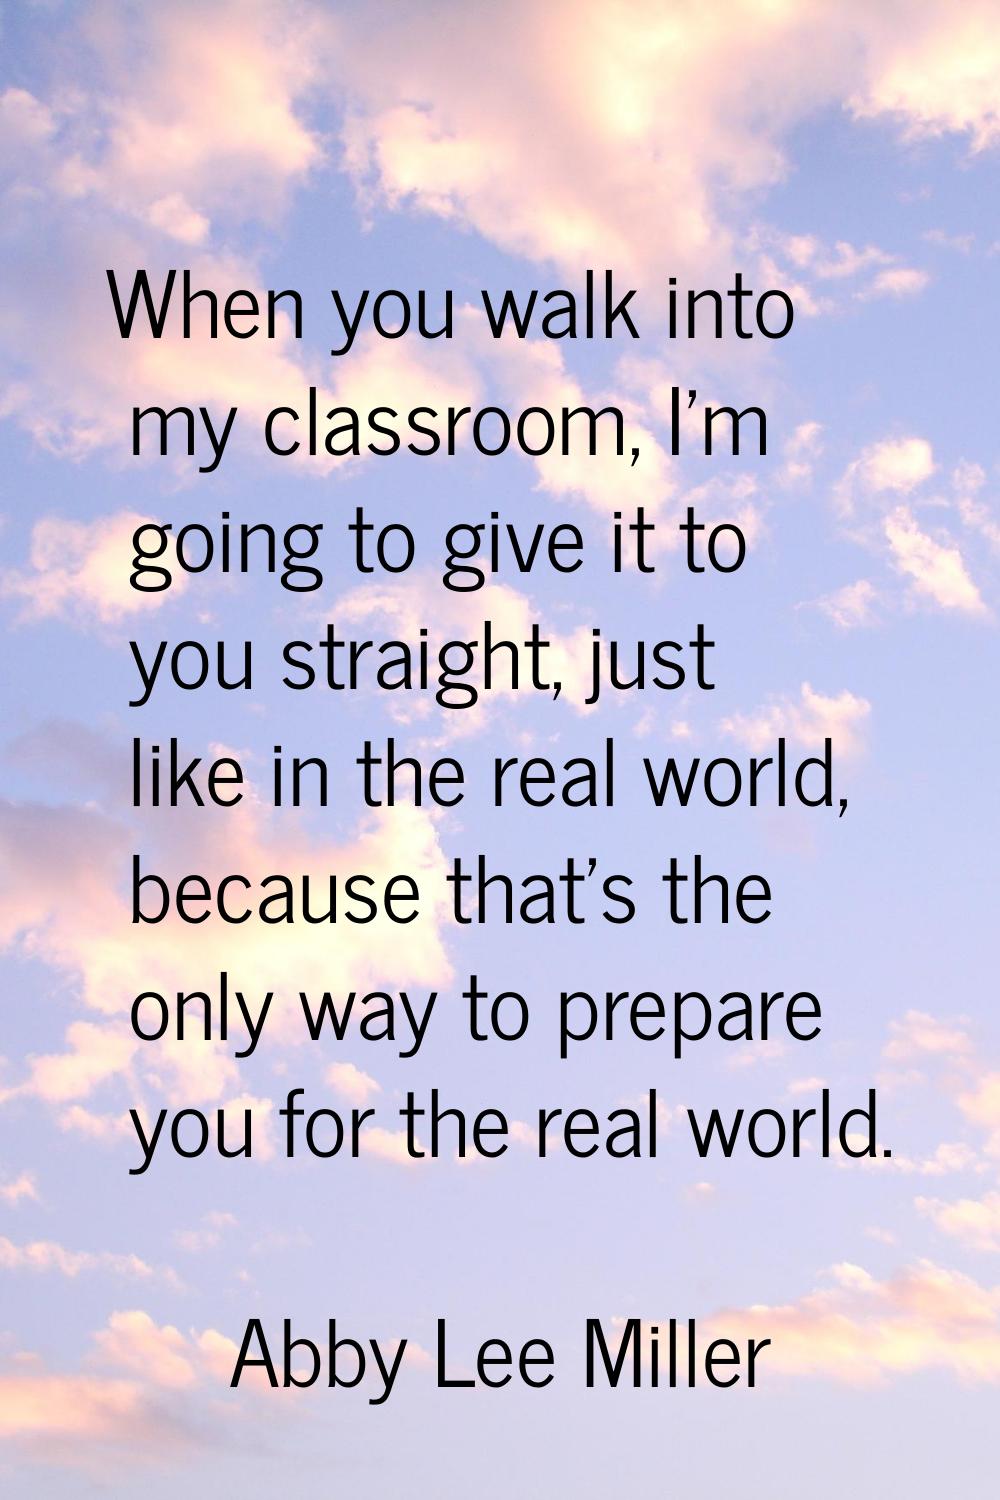 When you walk into my classroom, I'm going to give it to you straight, just like in the real world,